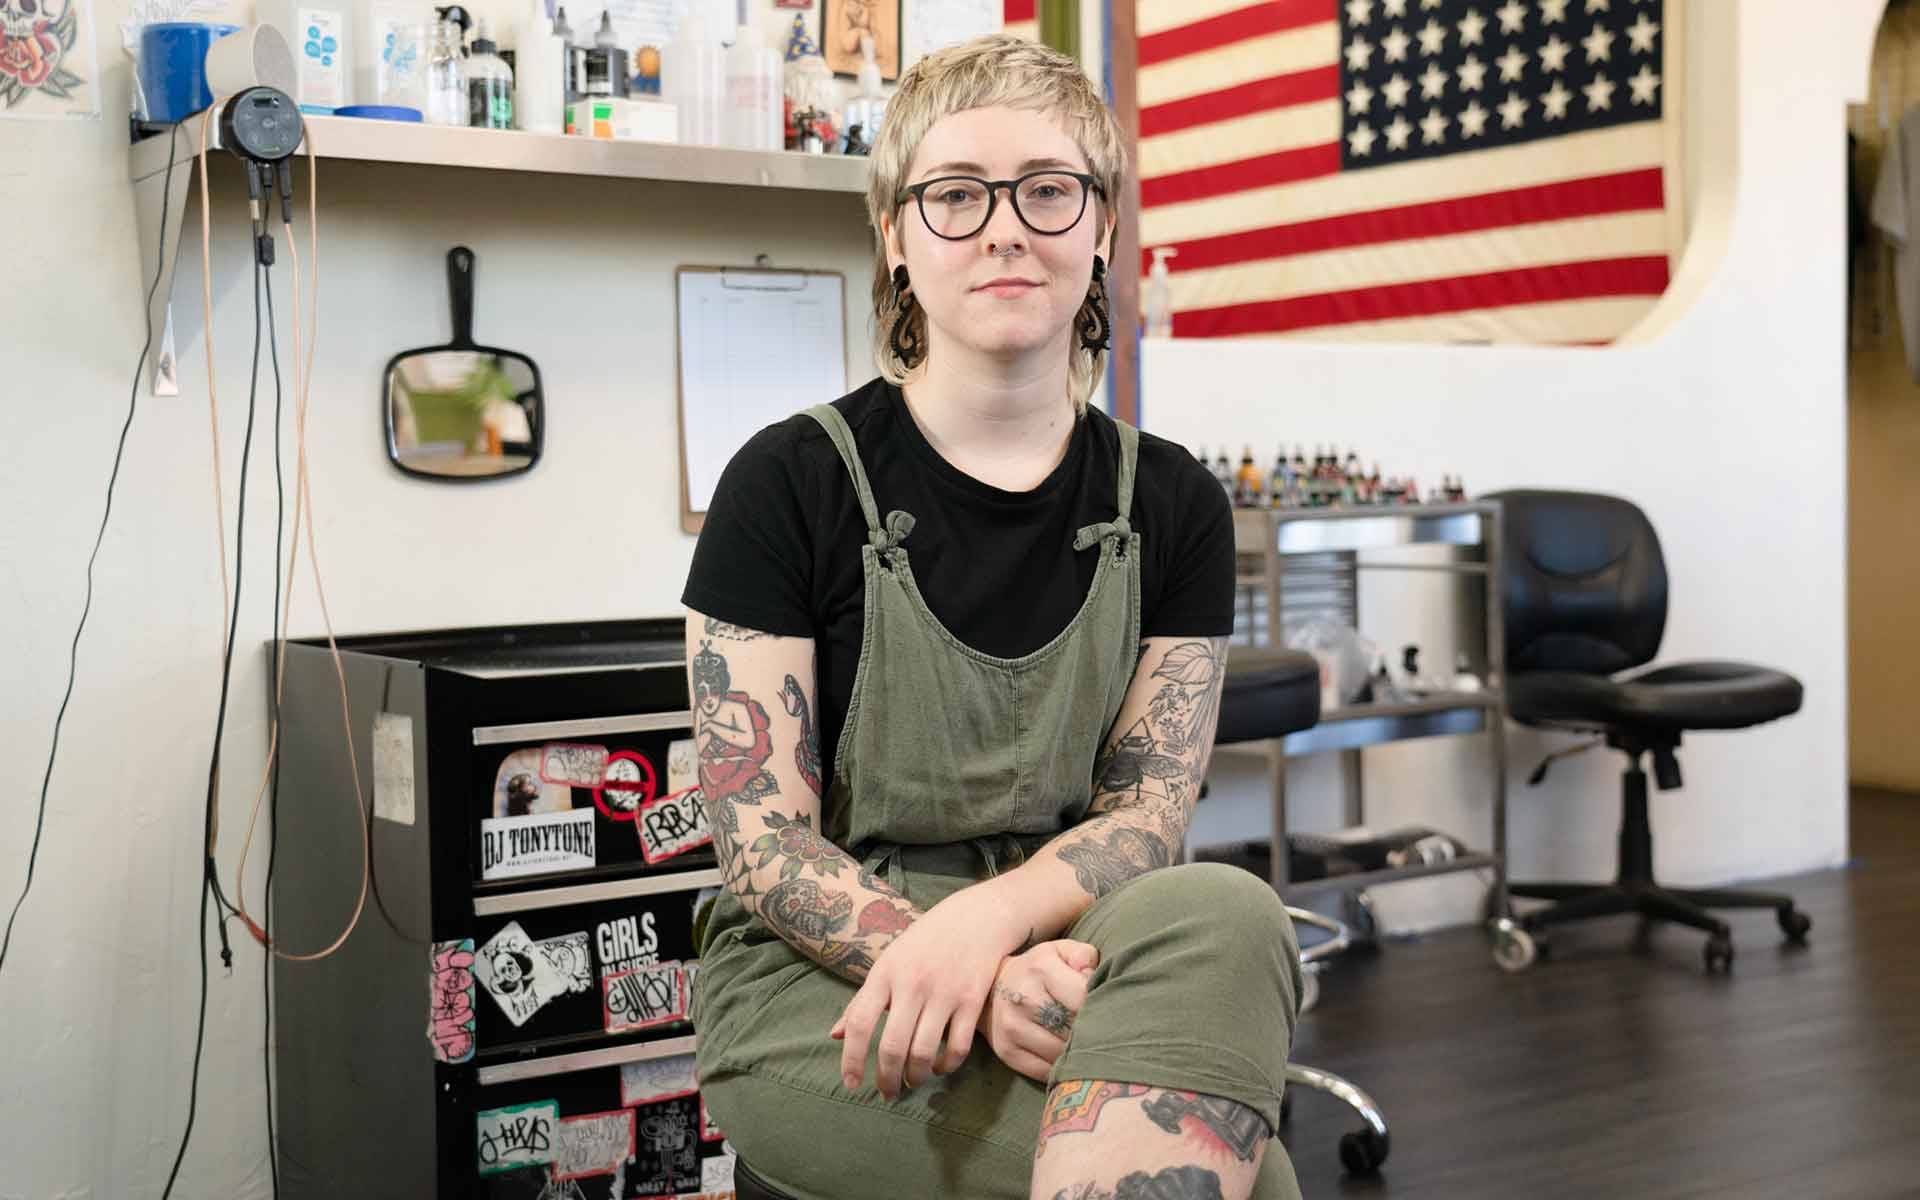 Emma Pierce at her tattoo station in Santa Rosa. The 23-year-old tattoo artist has been out of work for weeks due to the coronavirus shutdown. Graham Holoch / KQED